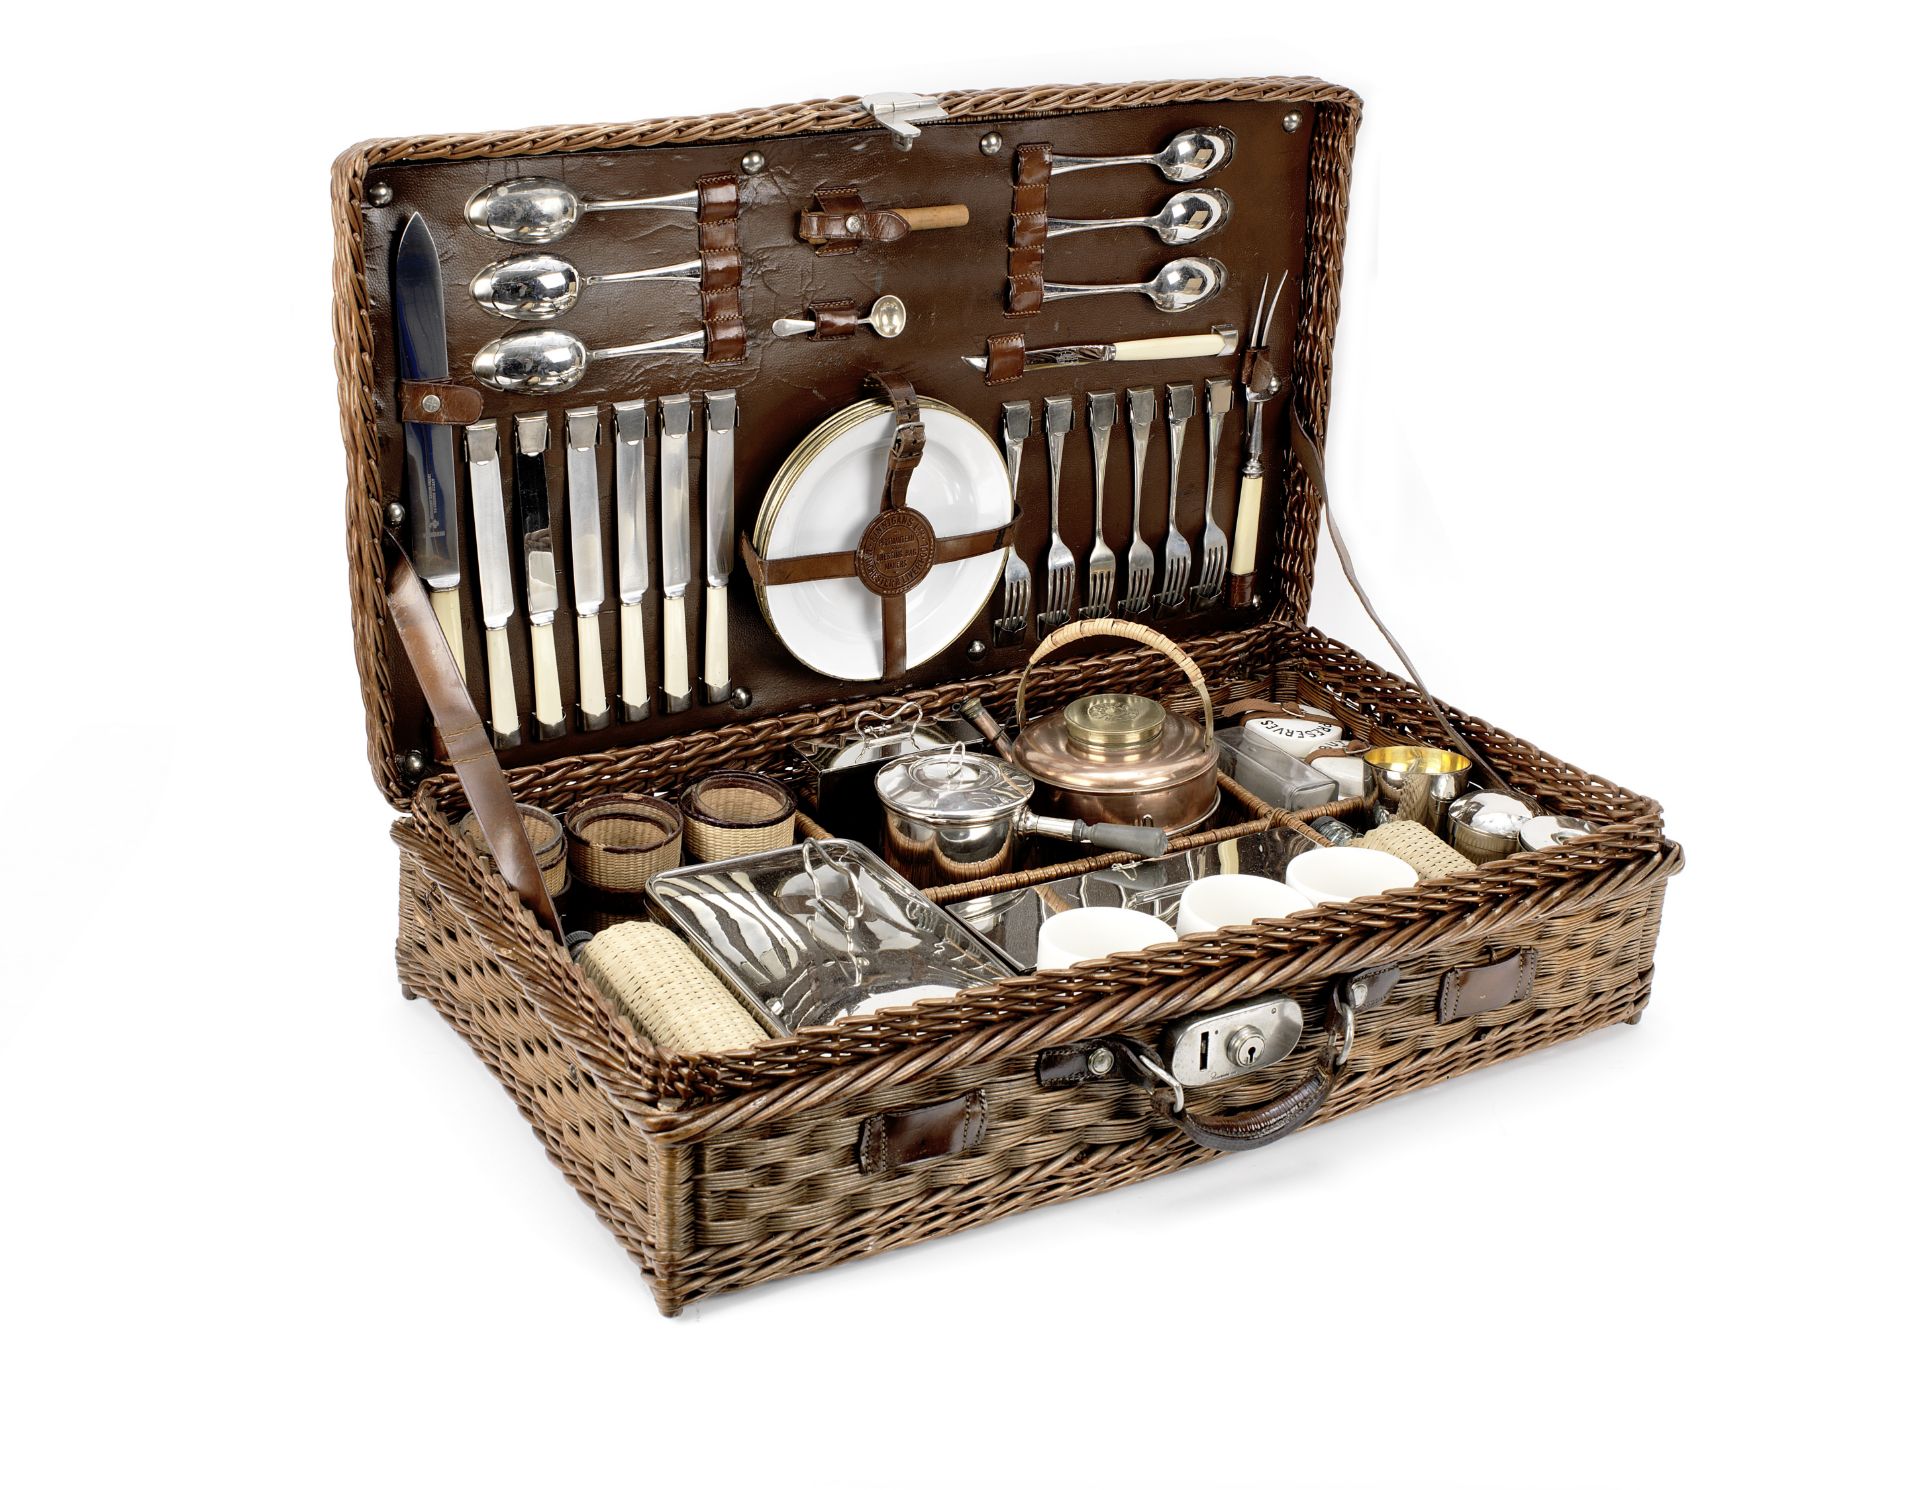 A wicker-cased picnic set for six persons by Finnigans, circa 1909,